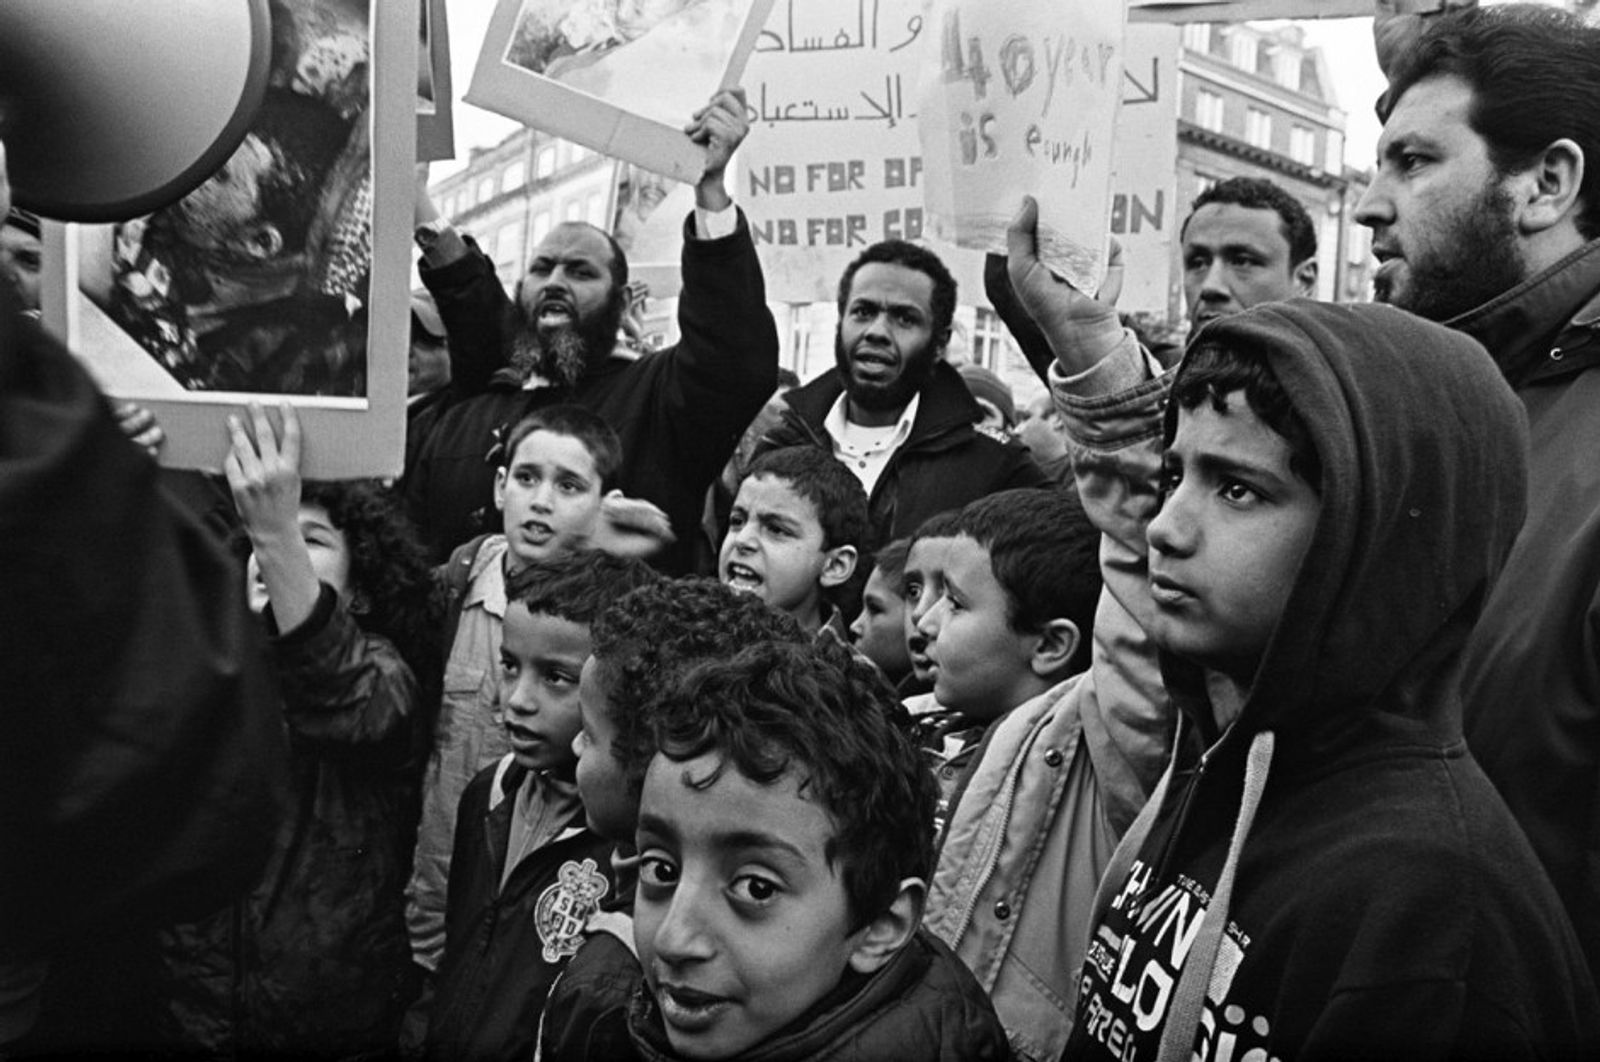 © Stephen Boyle - Solidarity protest by Libyan nationals in Dublin City, during the Libyan uprising. February 2011.